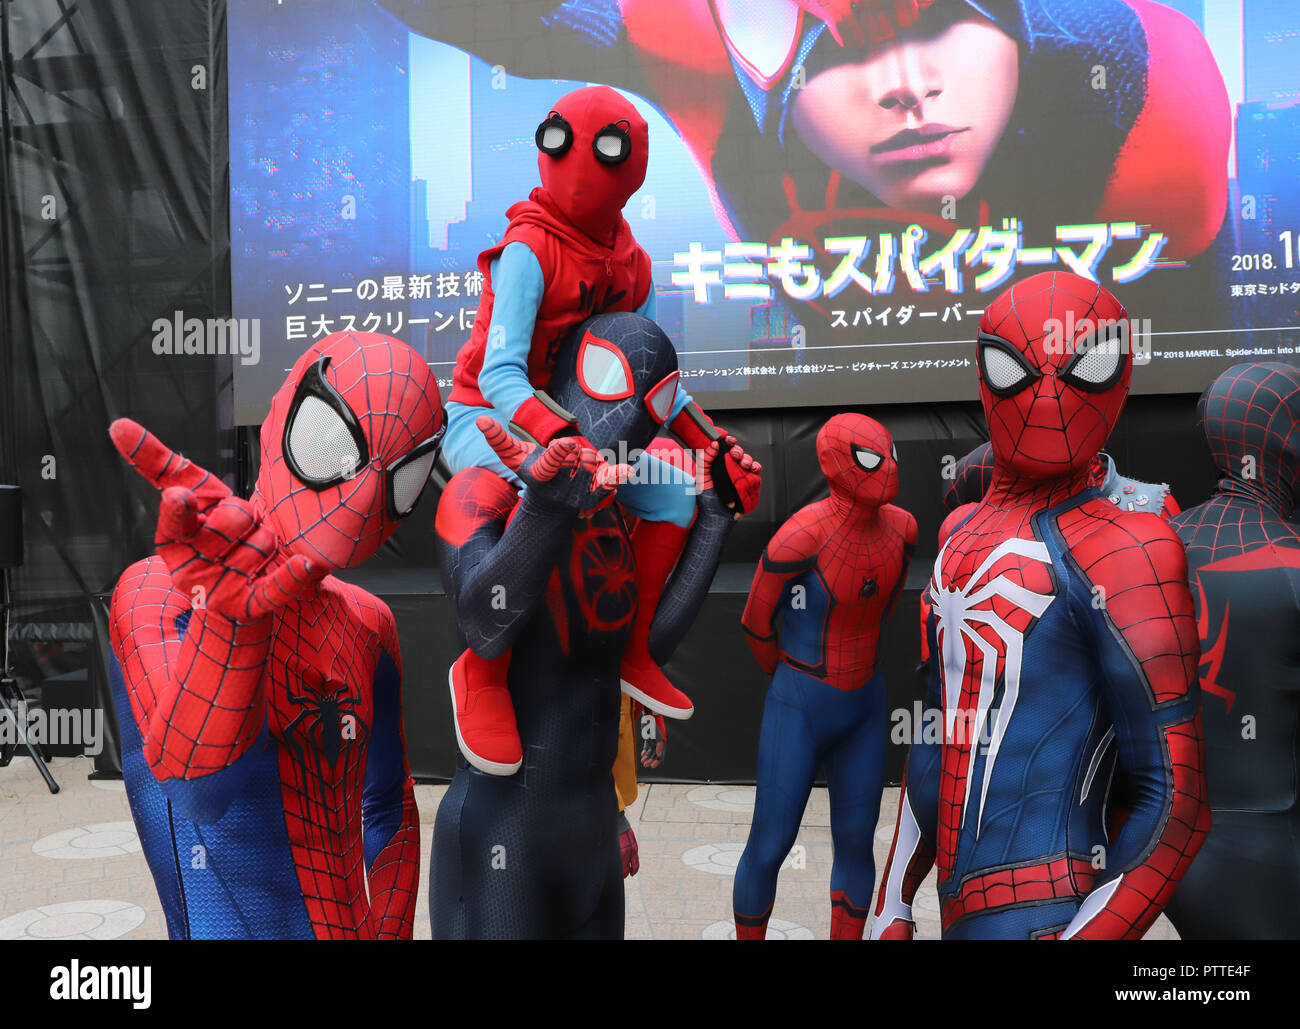 Tokyo Japan 11th Oct 18 Spider Man Cosplayers Pose For Photo As 24 Spider Man Gathered For The Promotion Of Sony Pictures Movie Spider Verse Which Will Be Screening Next Year At The Hibiya Cinema